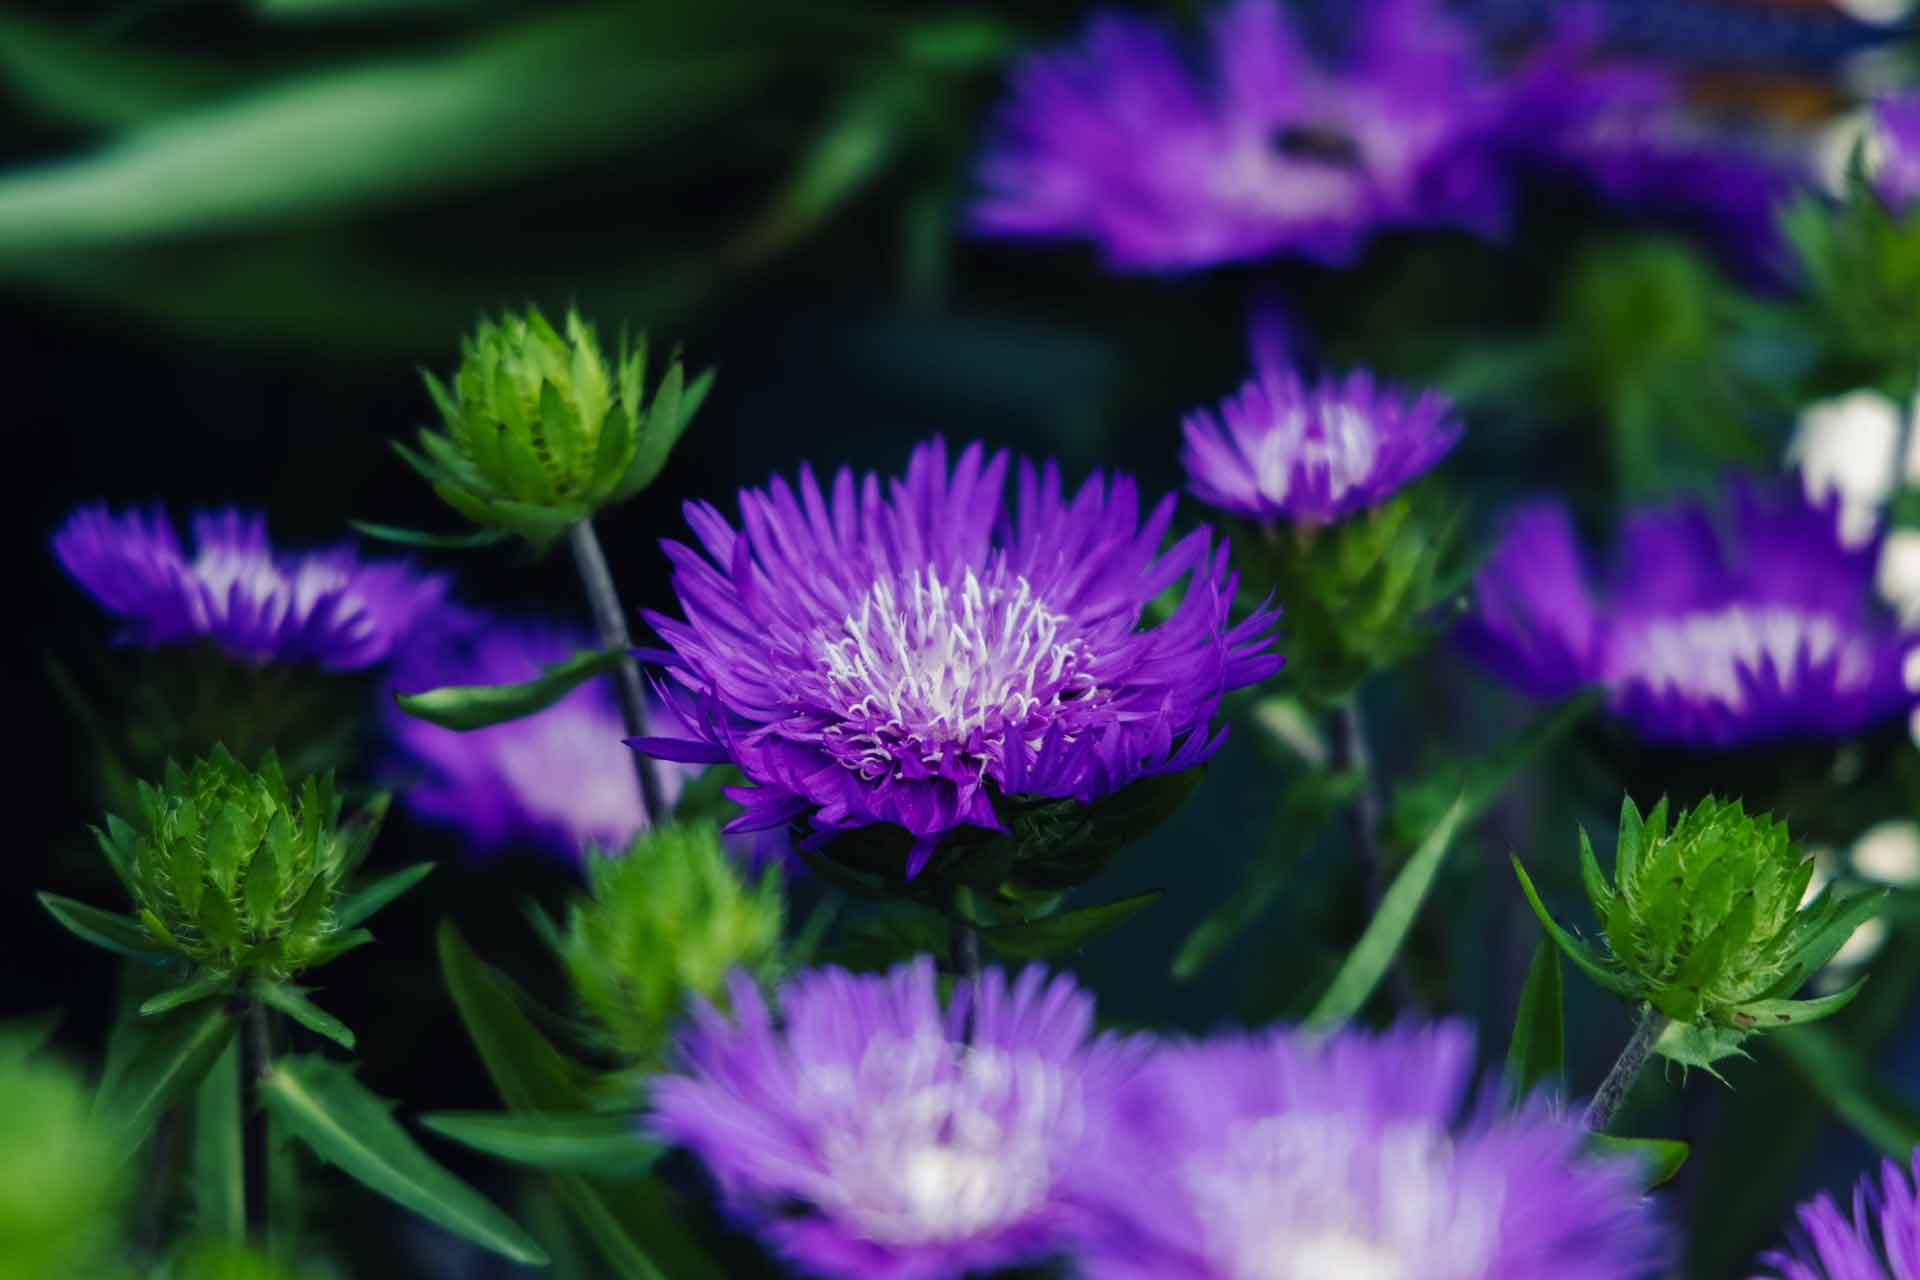 Stokes' Asters